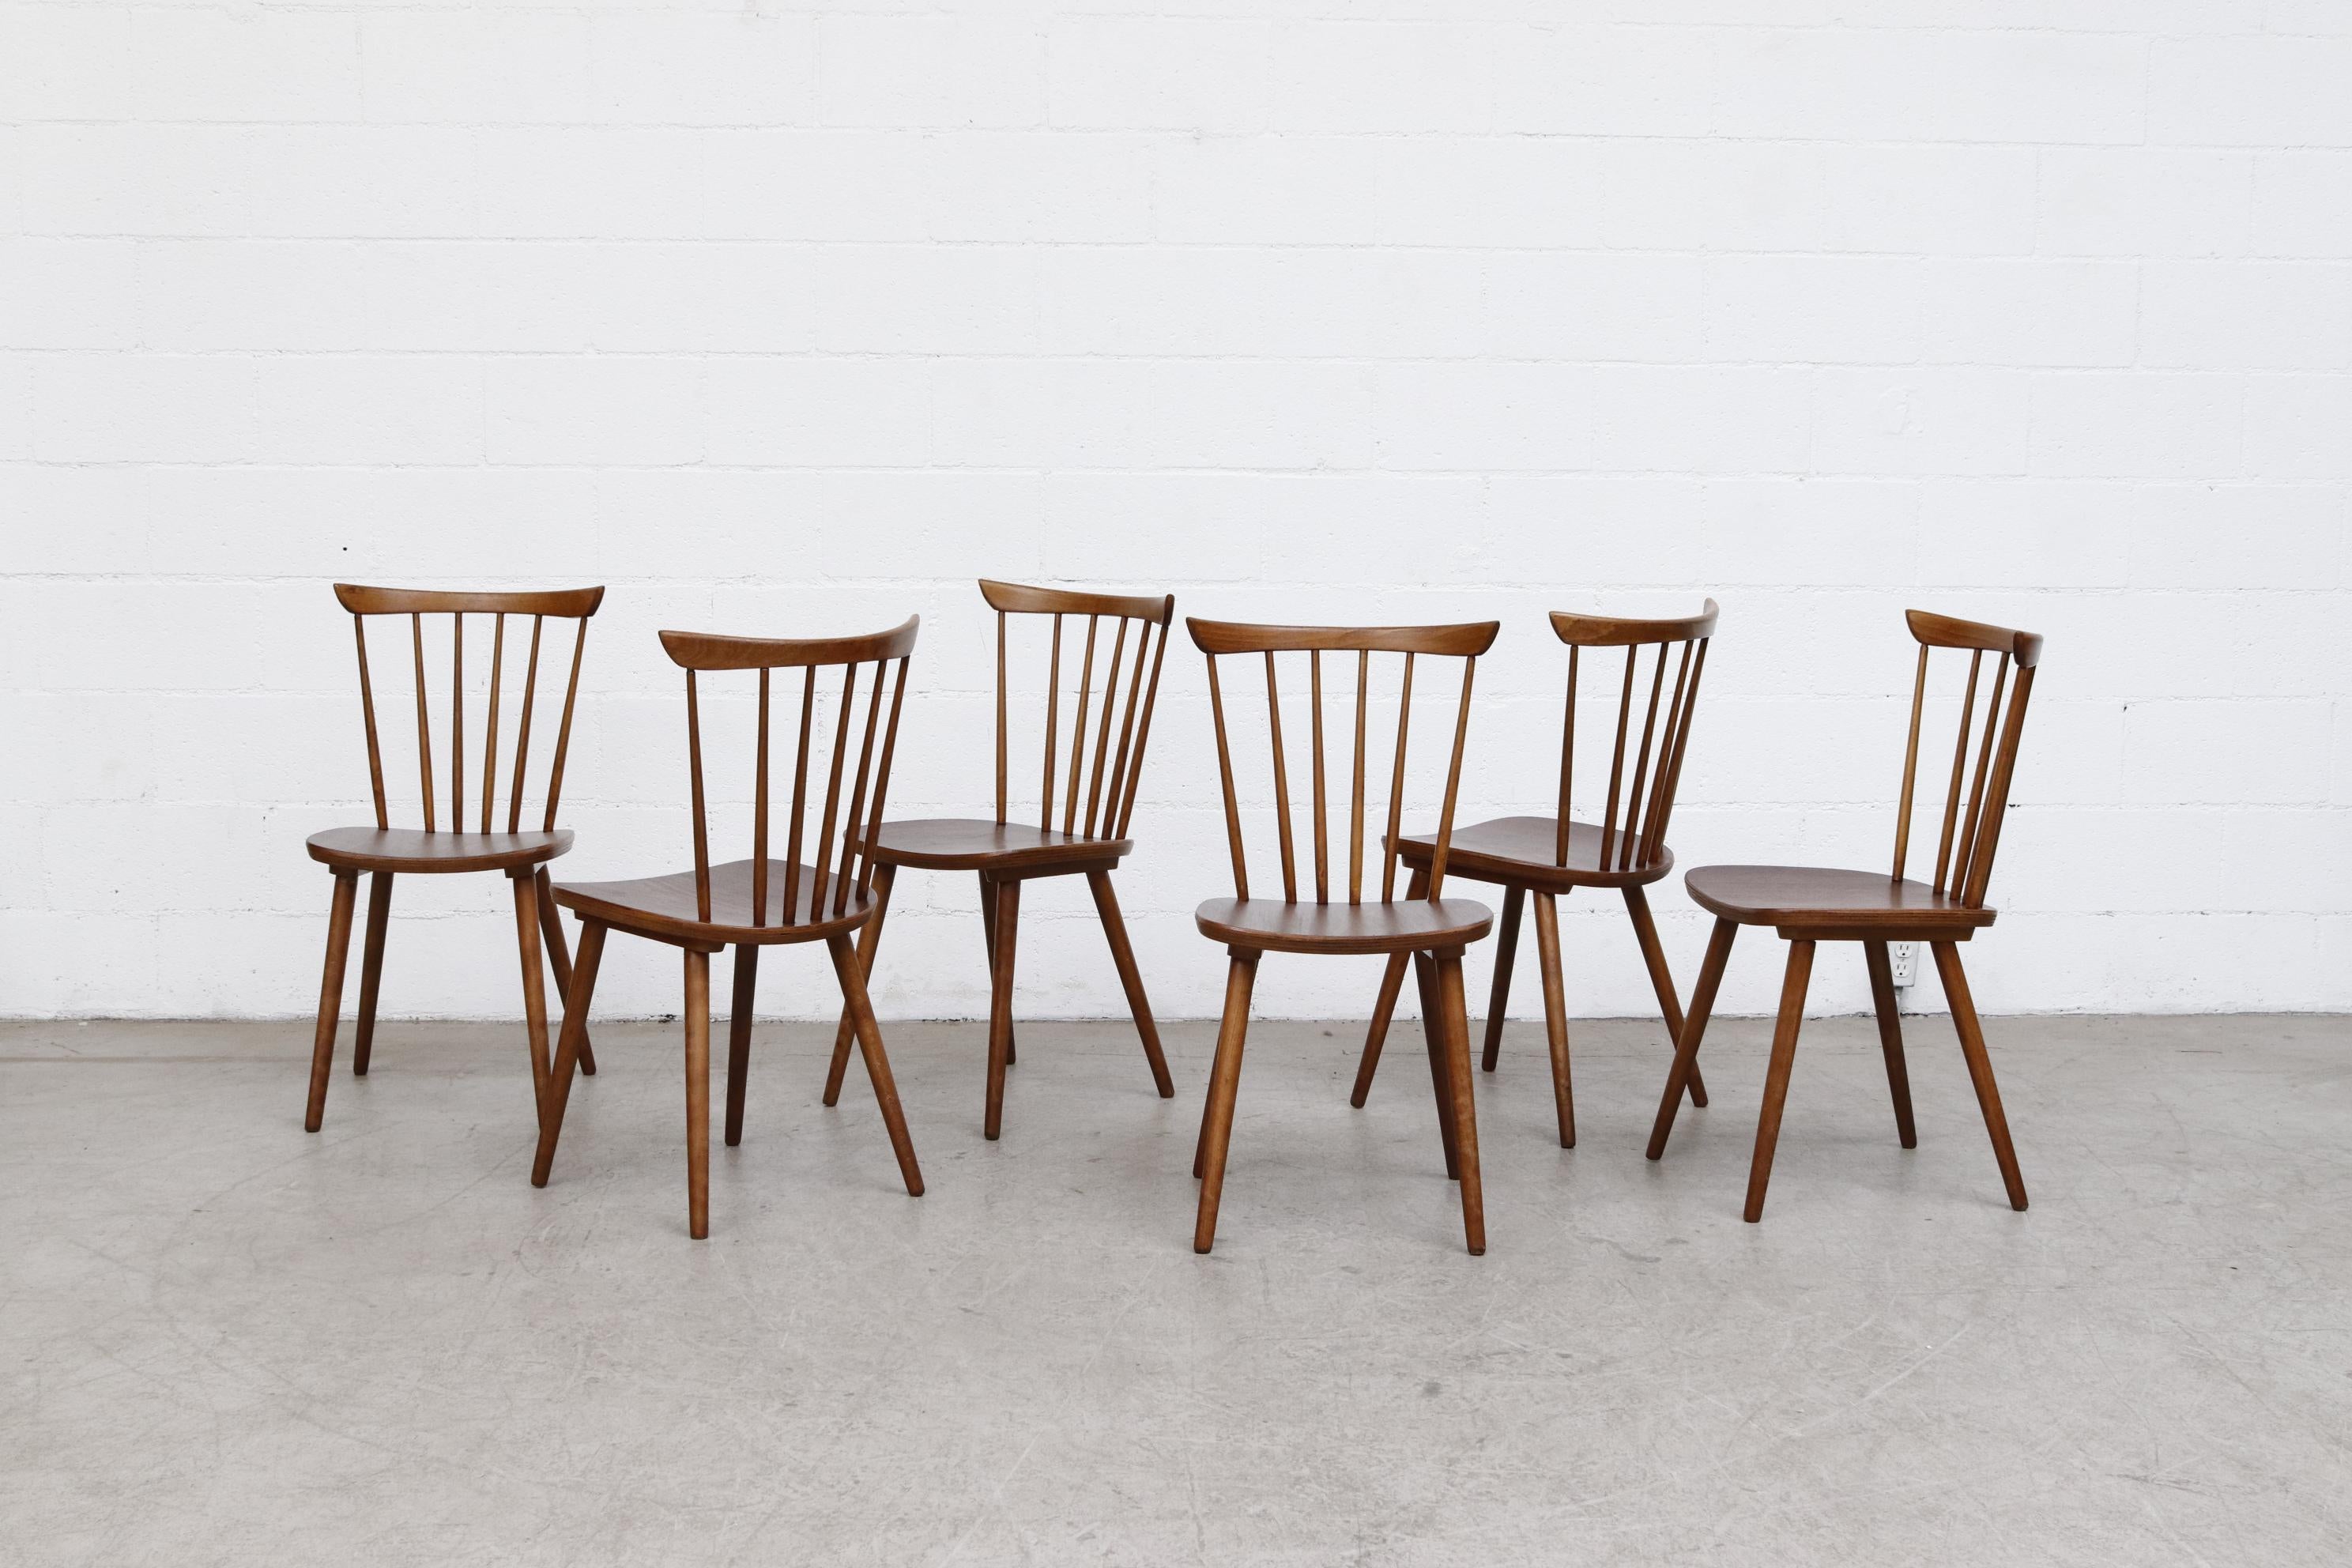 Midcentury Tapiovaara style spindle back dining chairs with clean lines with bowed back rest. In good overall condition with wear consistent with their age and usage. Individually listed.